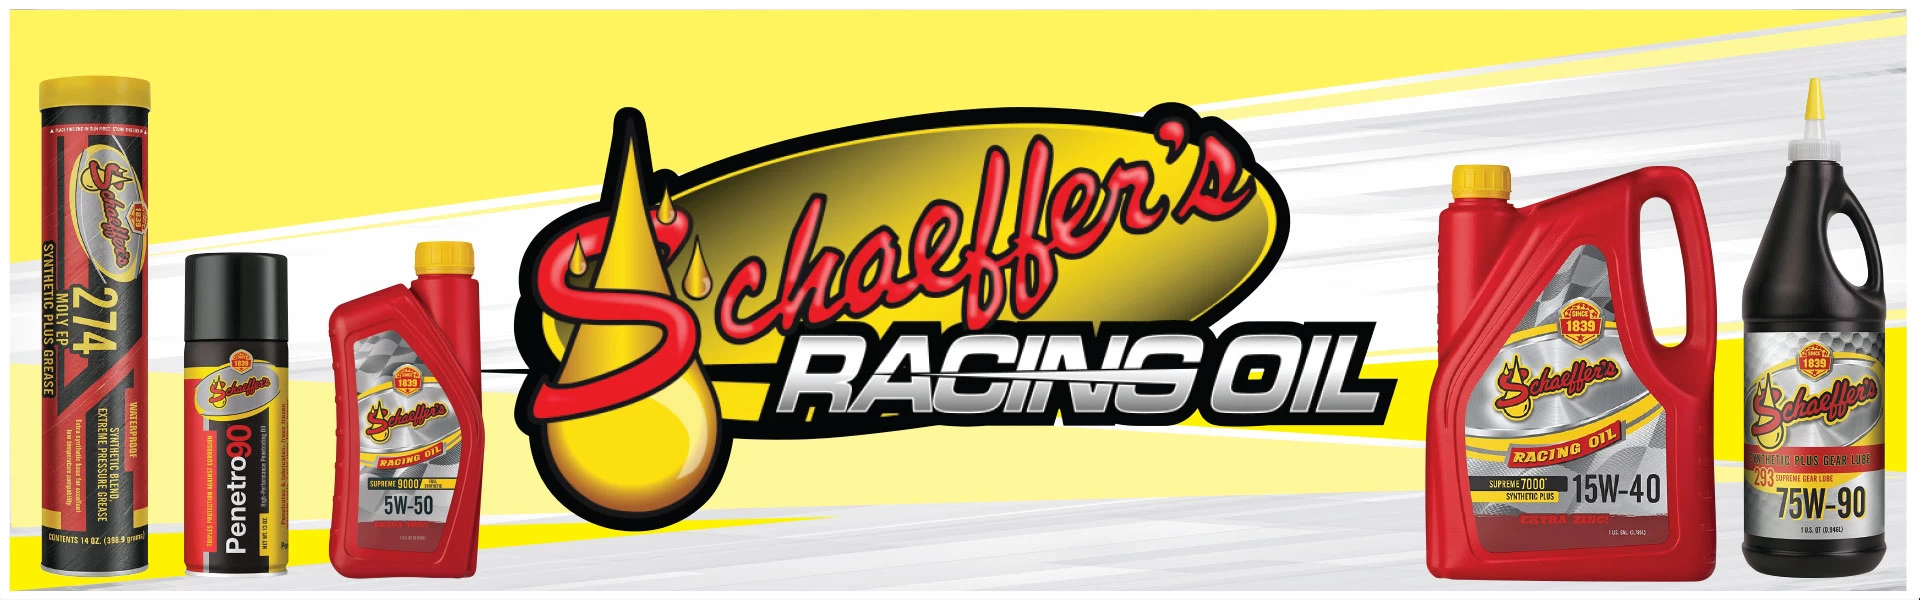 Schaeffer's Racing Oil and Specialty Lubricants available at Day Motor Sports